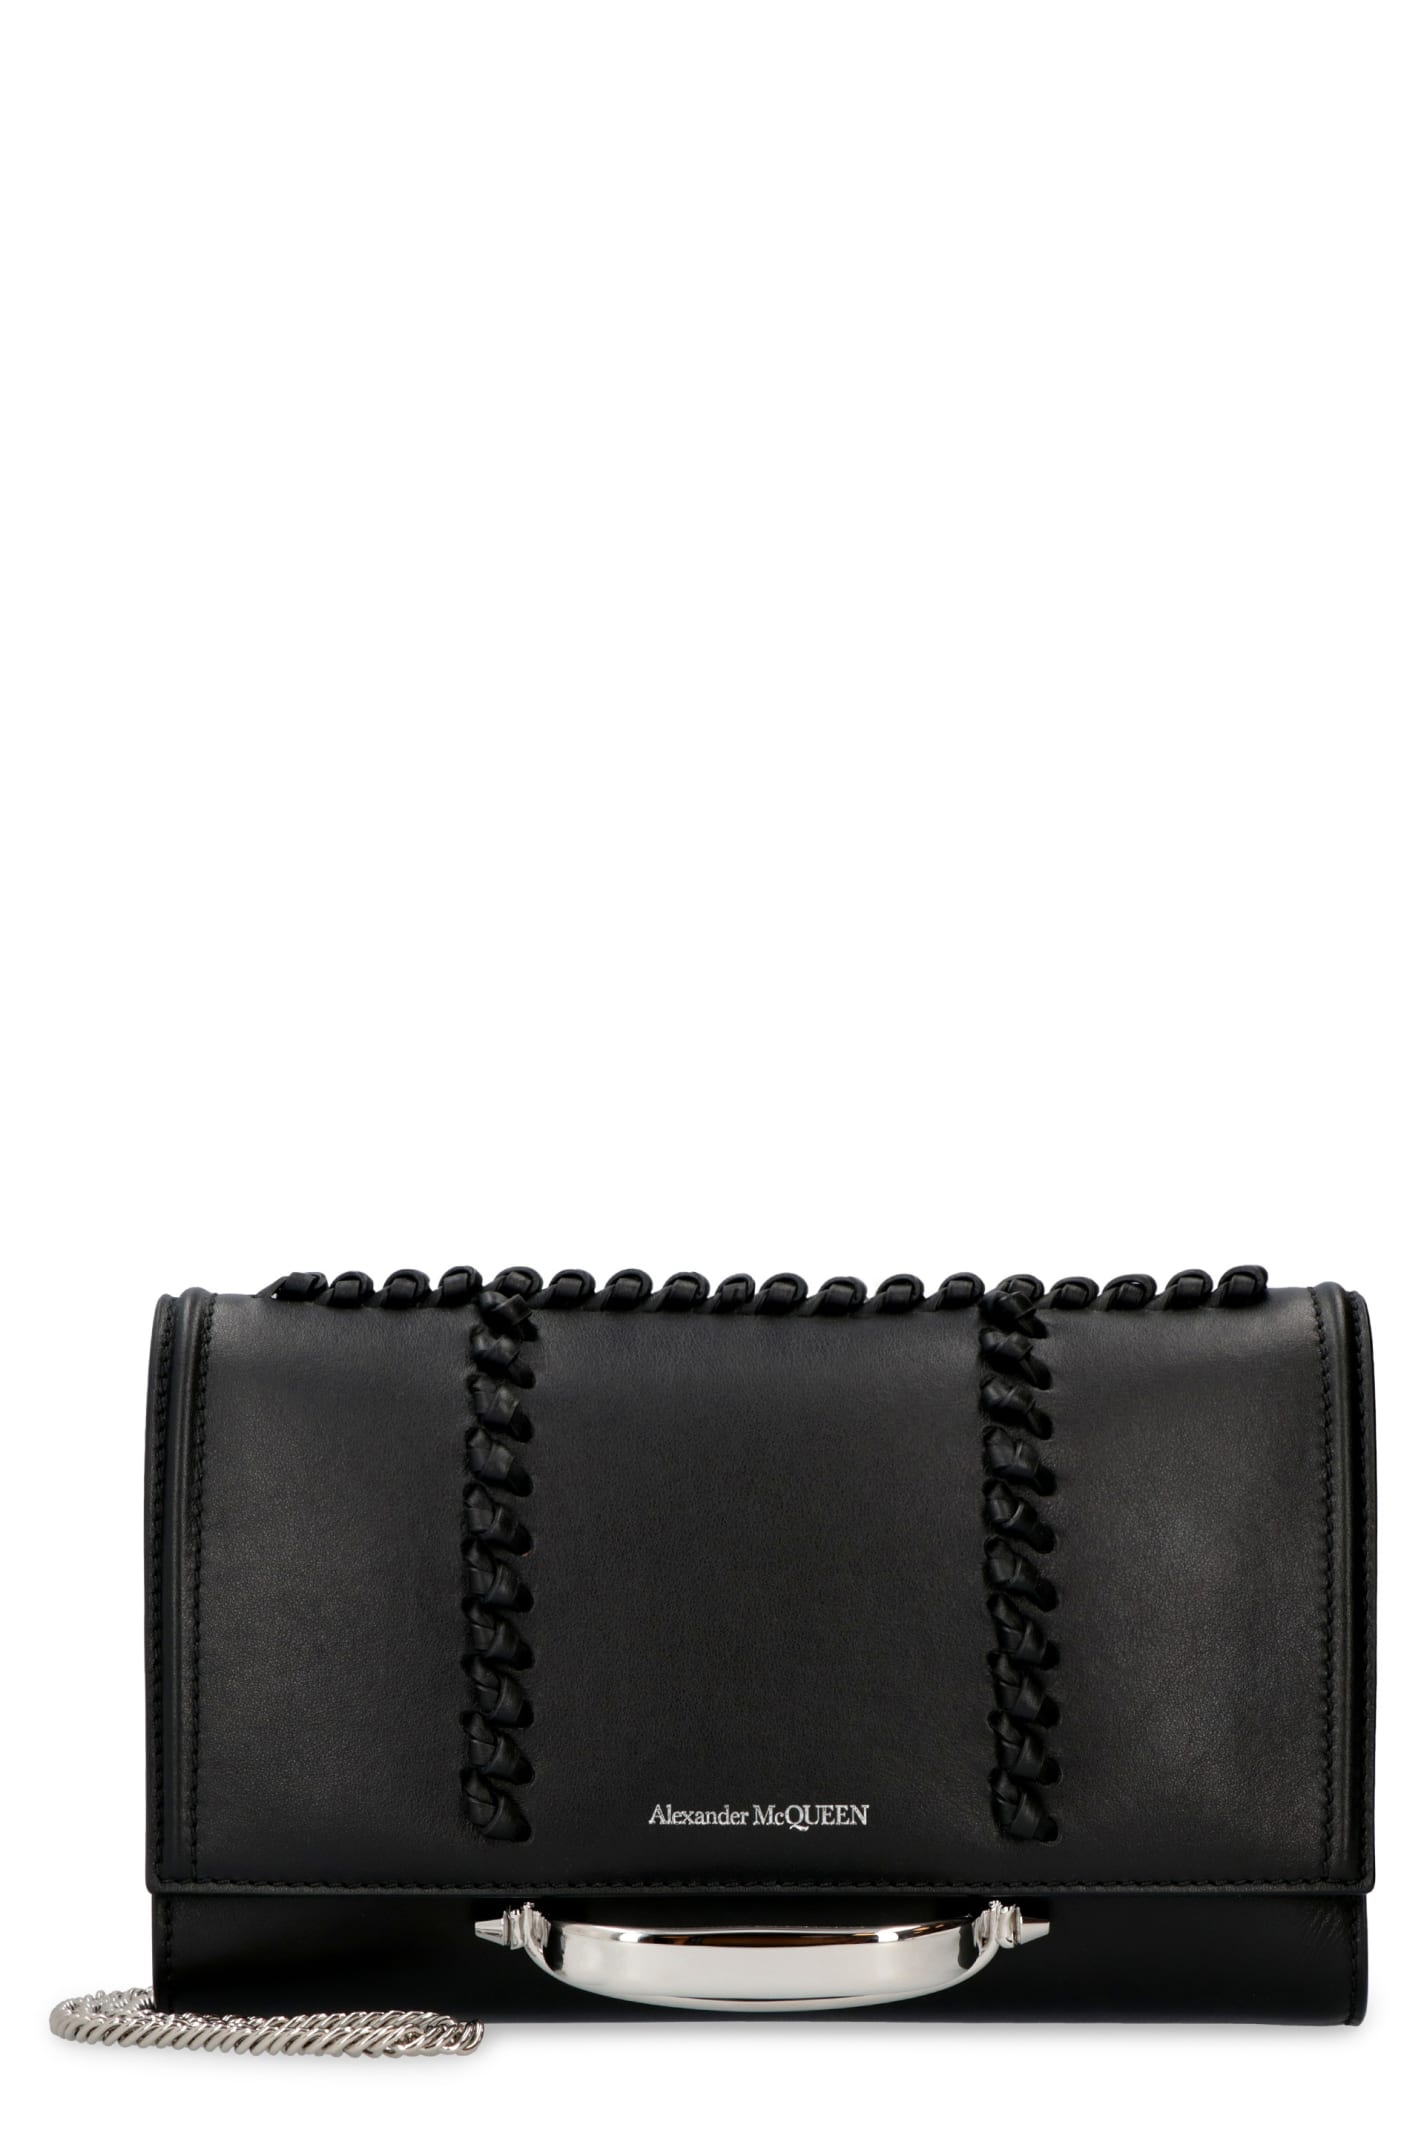 ALEXANDER MCQUEEN THE STORY LEATHER BAG,11731259